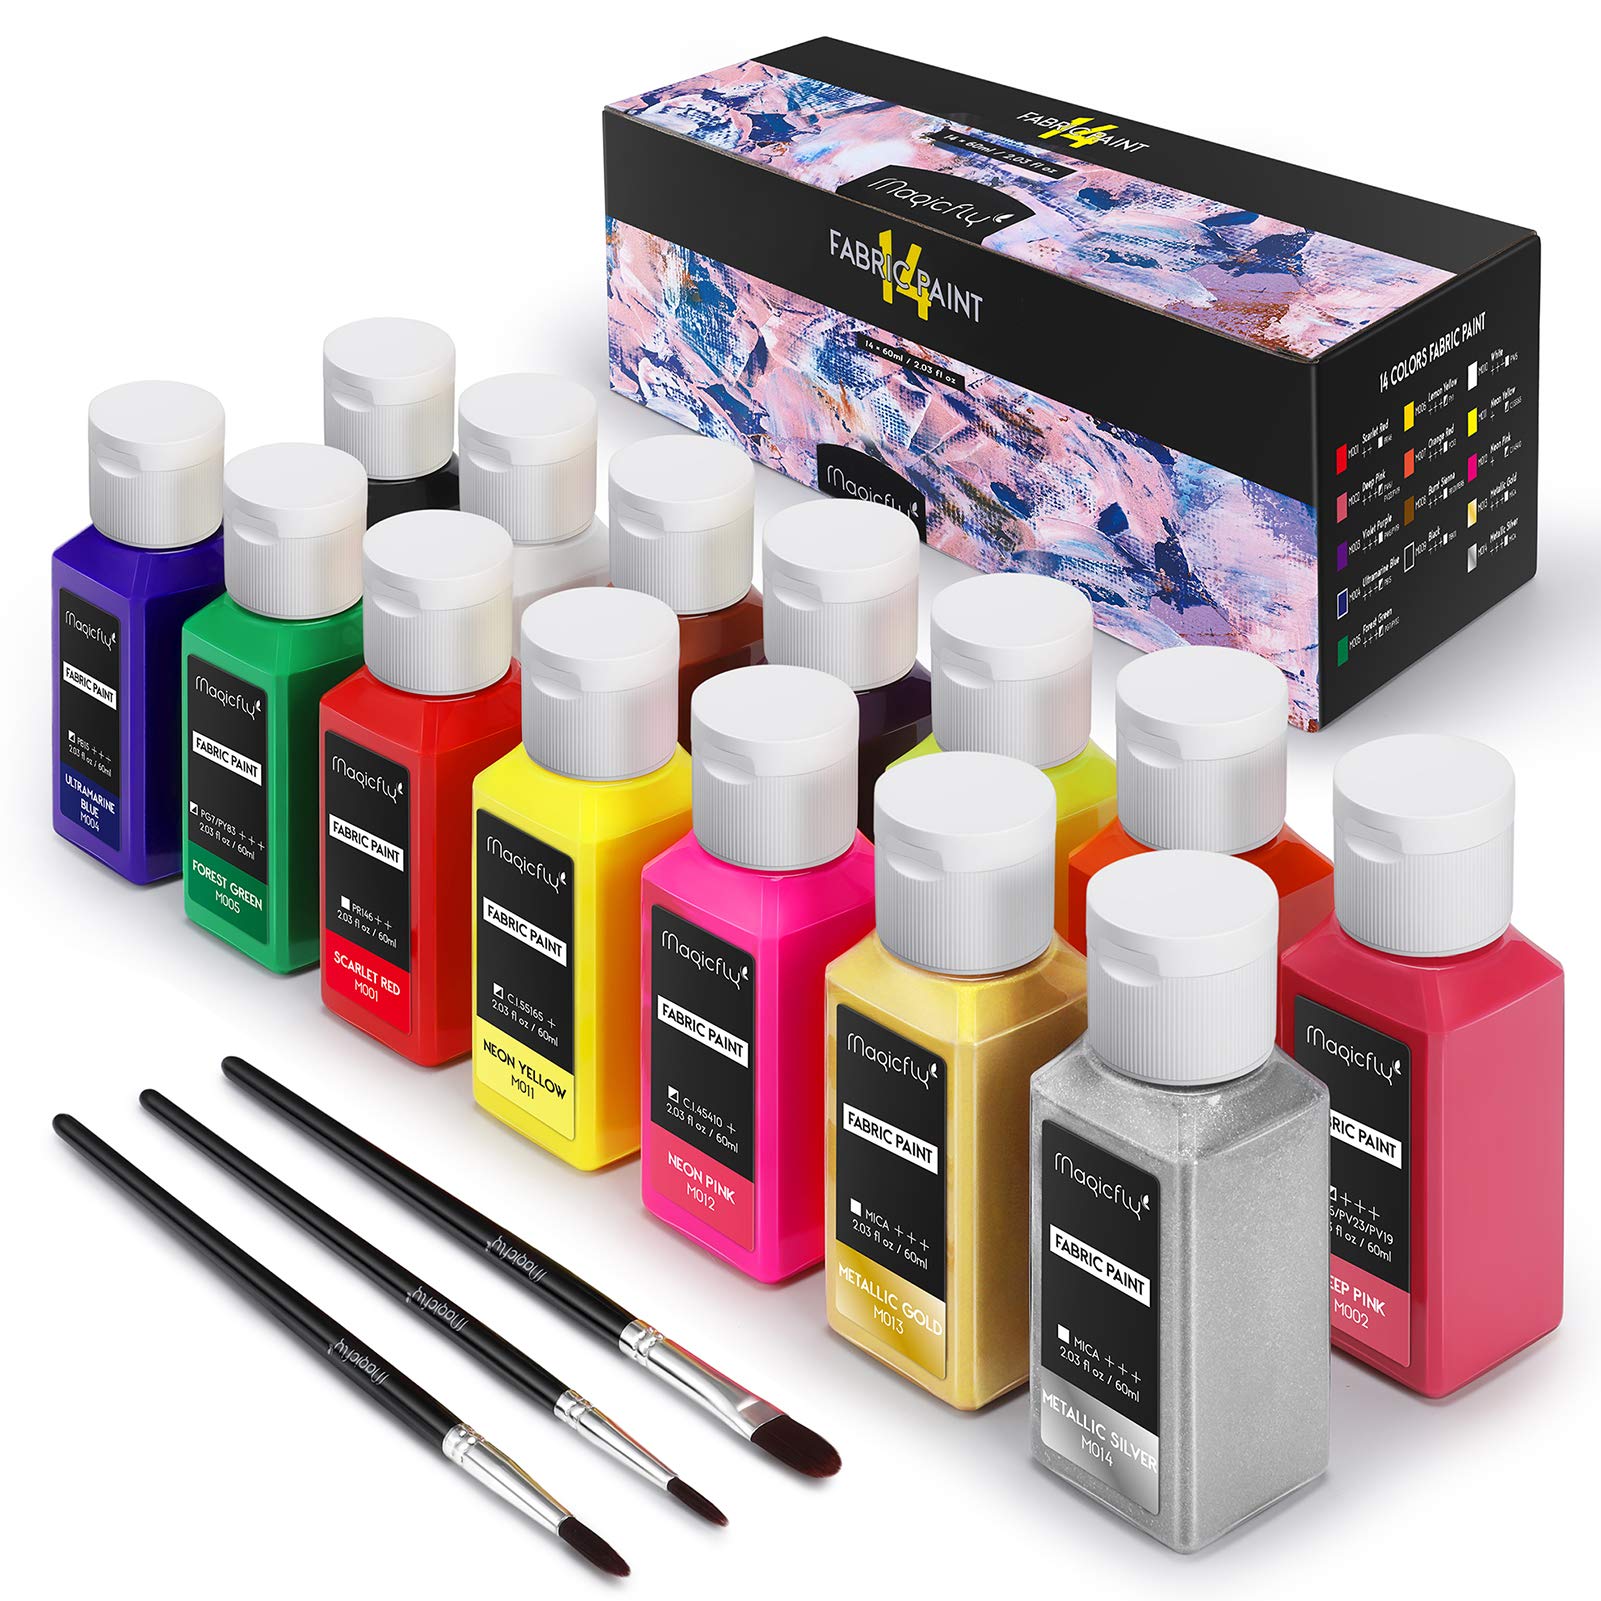 Permanent 3D Fabric Paint Set with 24 Colors (30ml), 5 Brushes, Canvas Bag,  5 Sticker Stencils Sheets for Ceramic, Wood, Glass